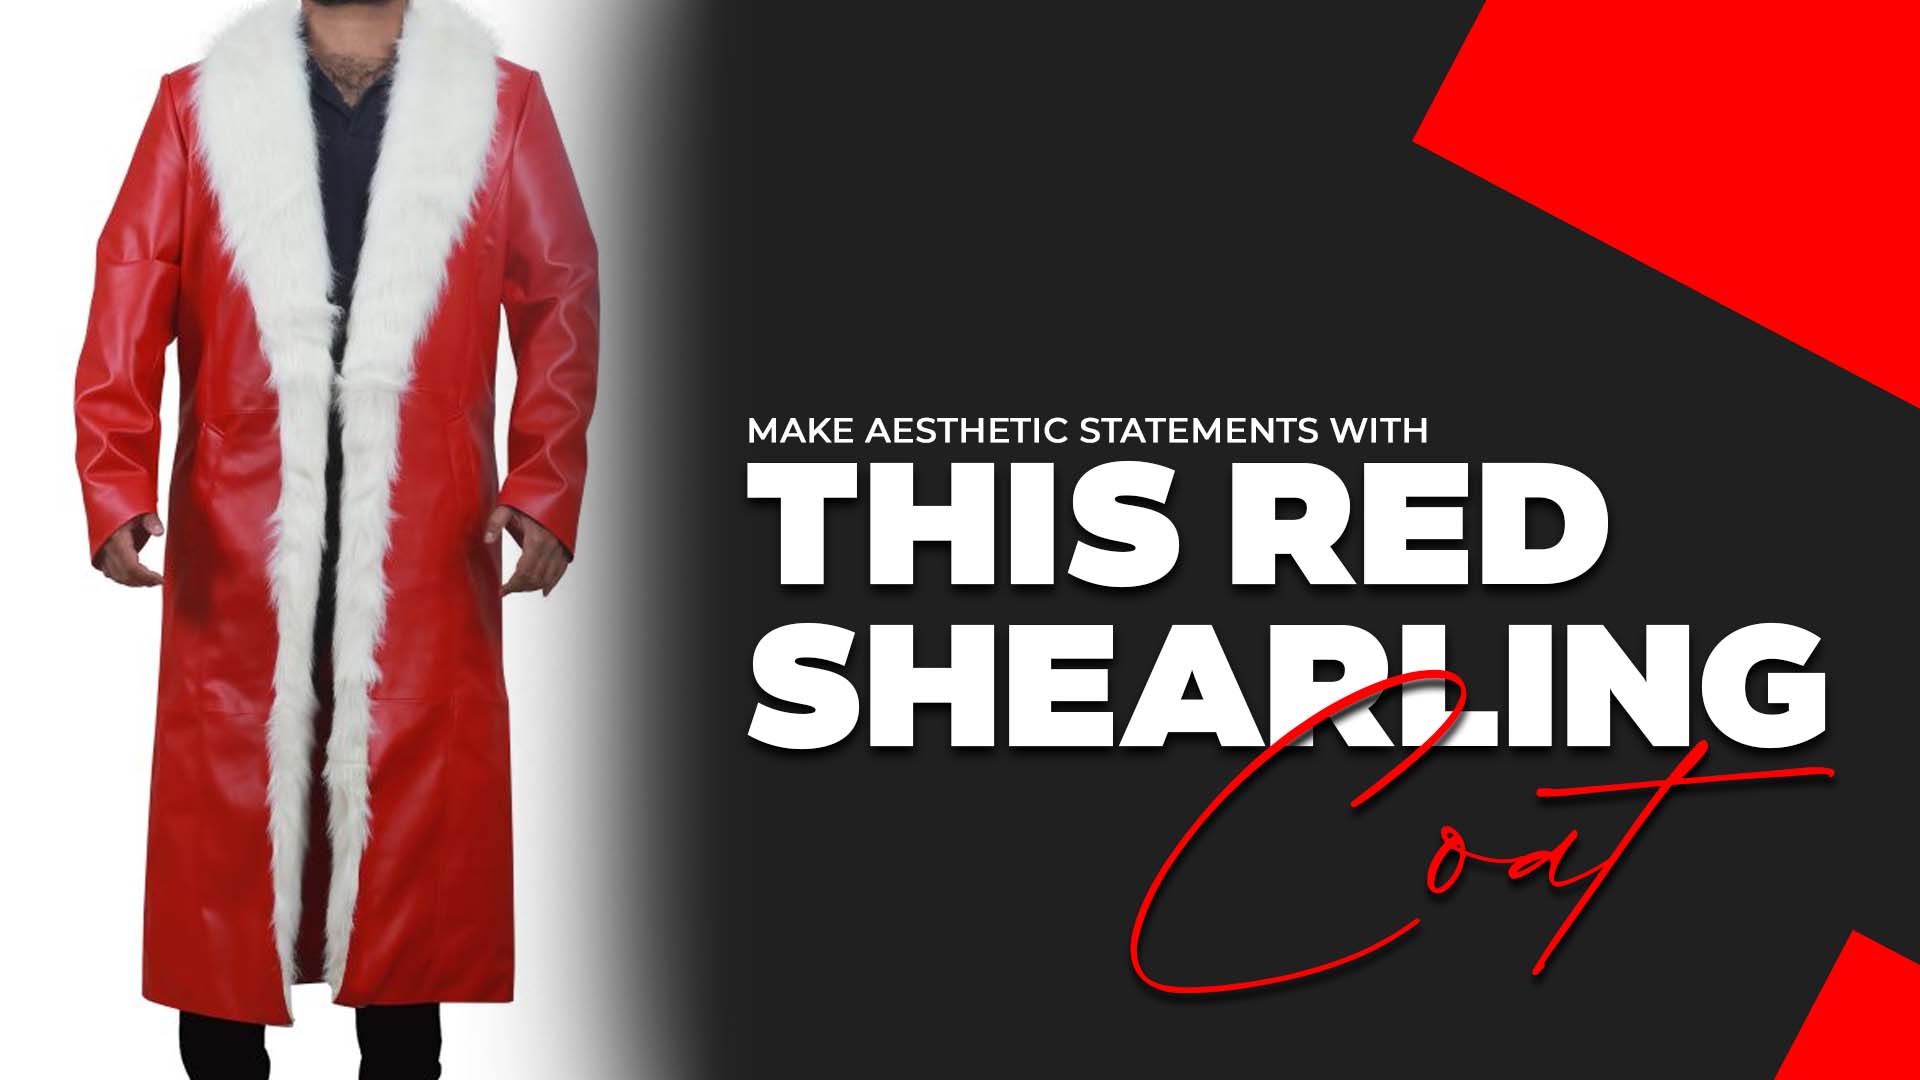 Make Aesthetic Statements With This Red Shearling Coat